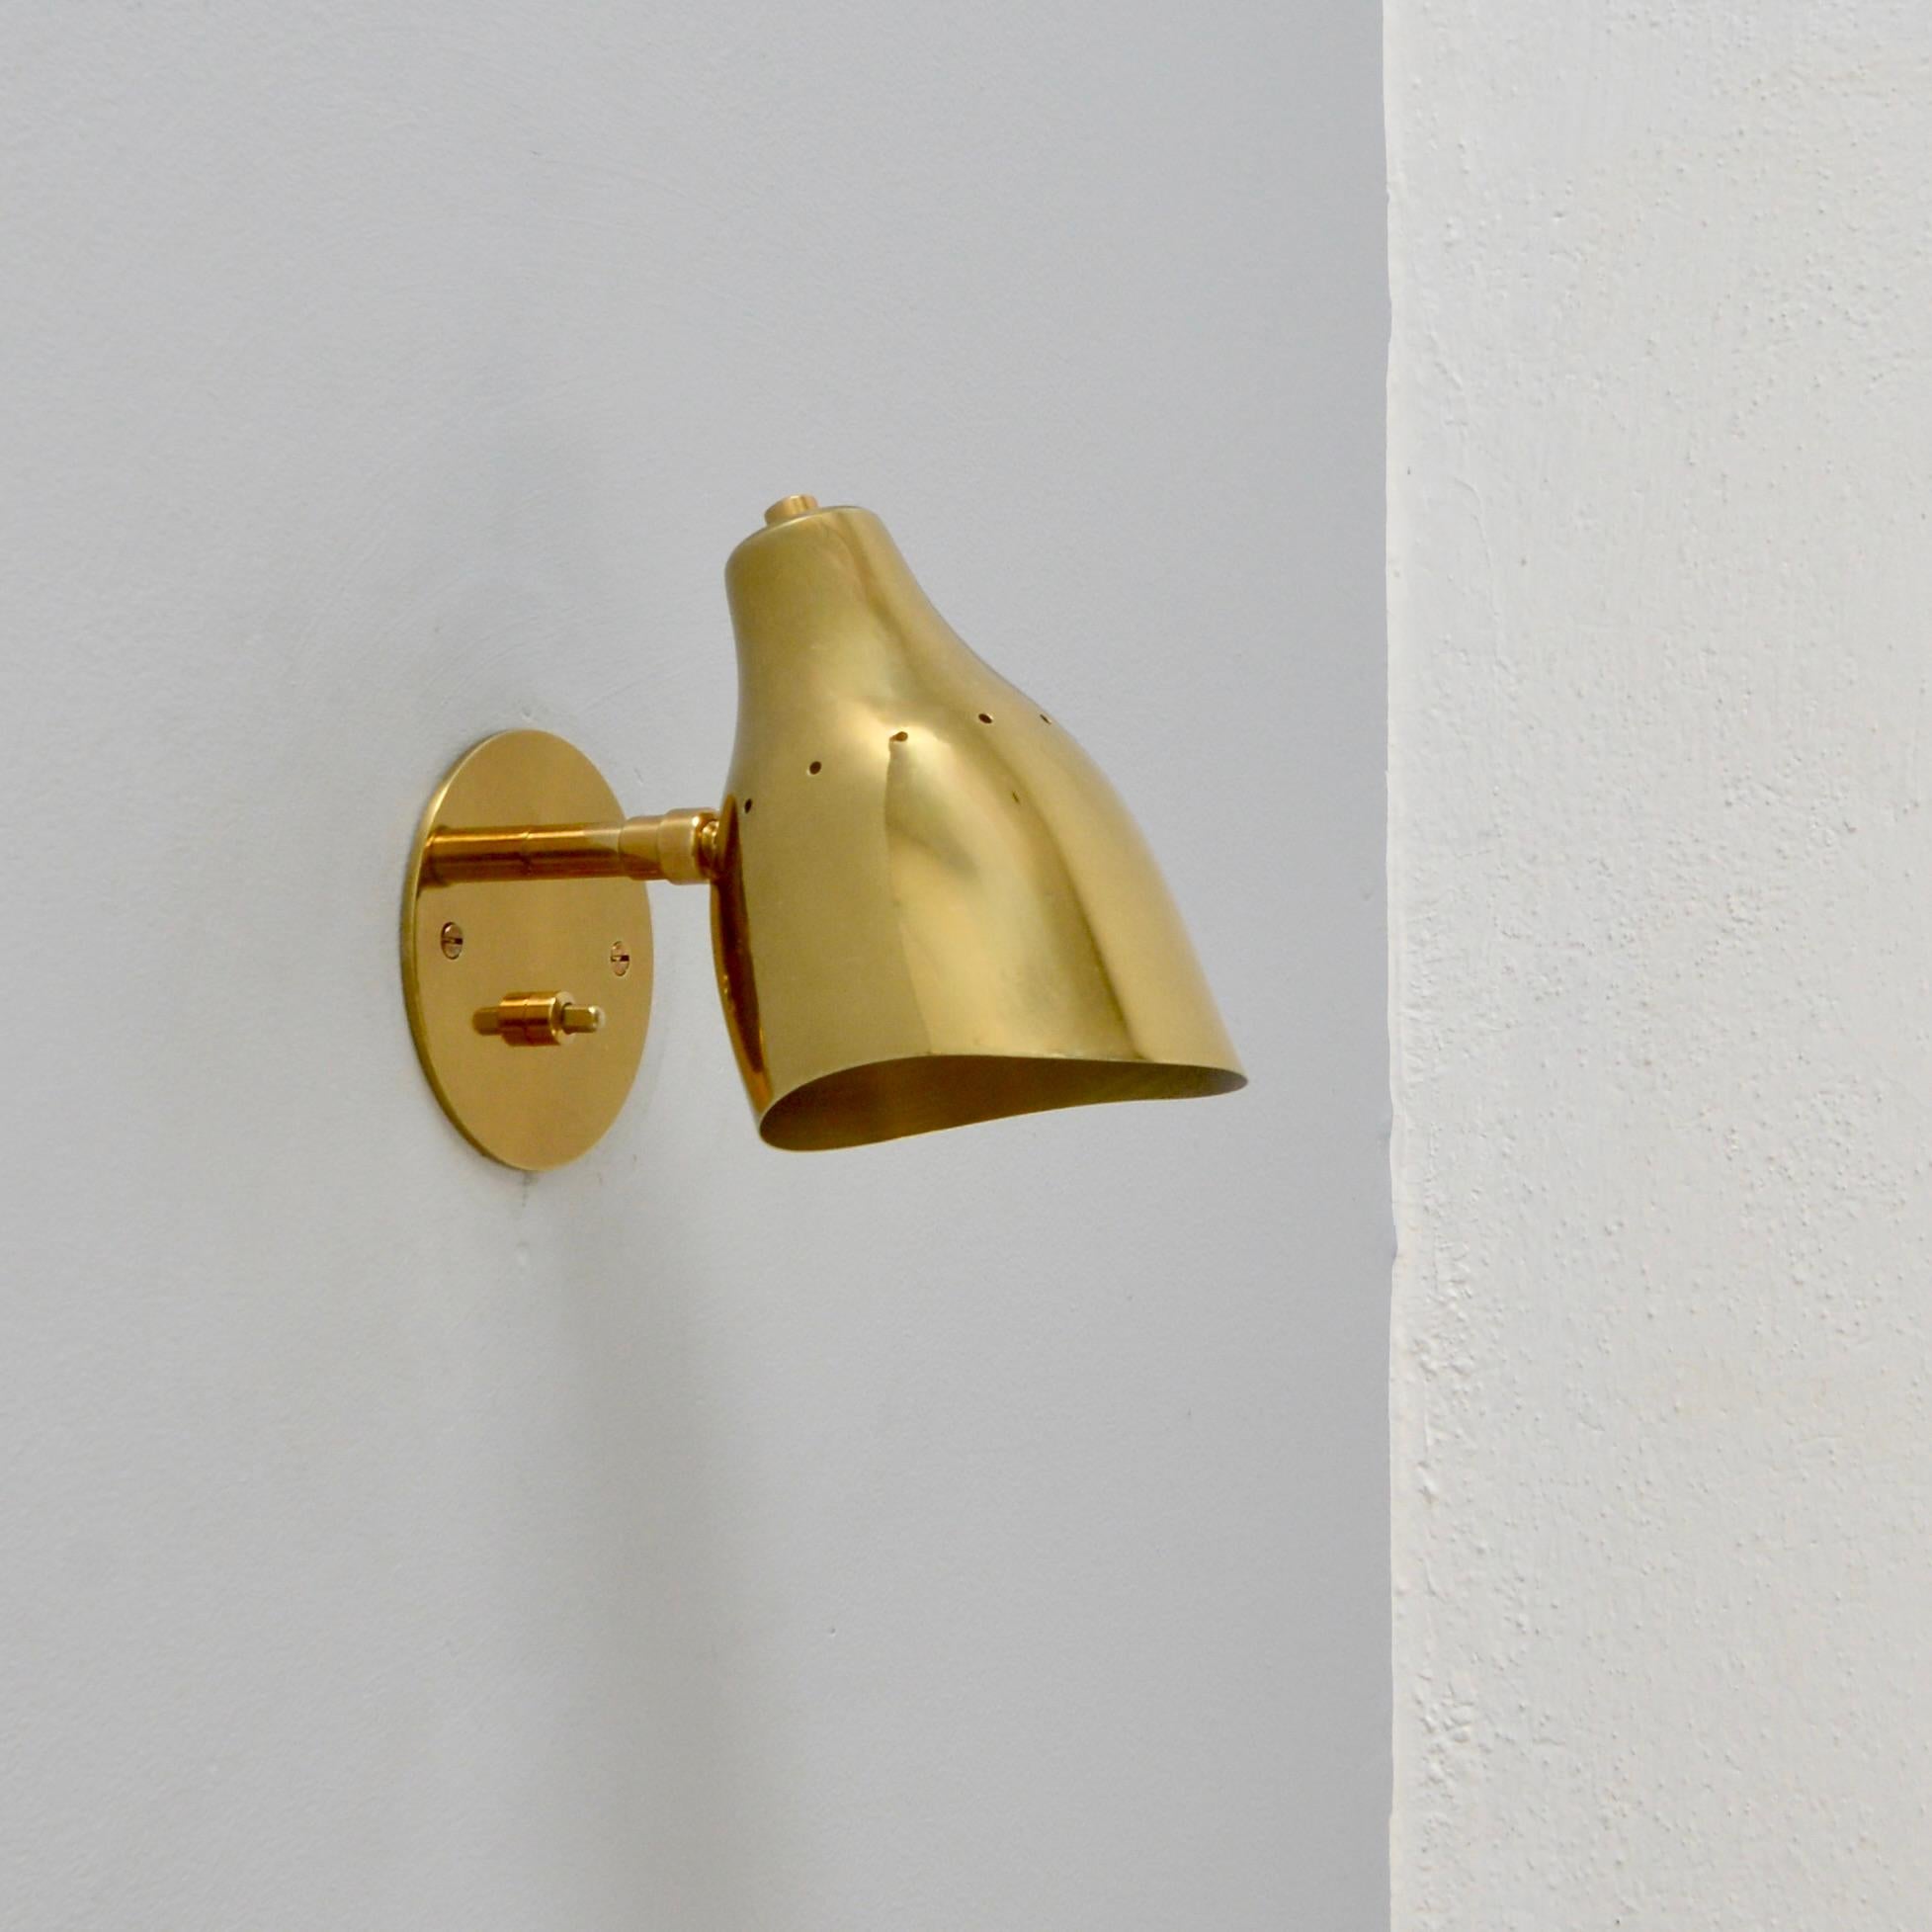 Beautiful Lumfardo LUread spot sconce in solid brass with a push switch on the backplate. A sconce inspired as a contemporary take on classic midcentury lines. Can be wired for any region worldwide. Single E12 candelabra based socket. Light bulbs